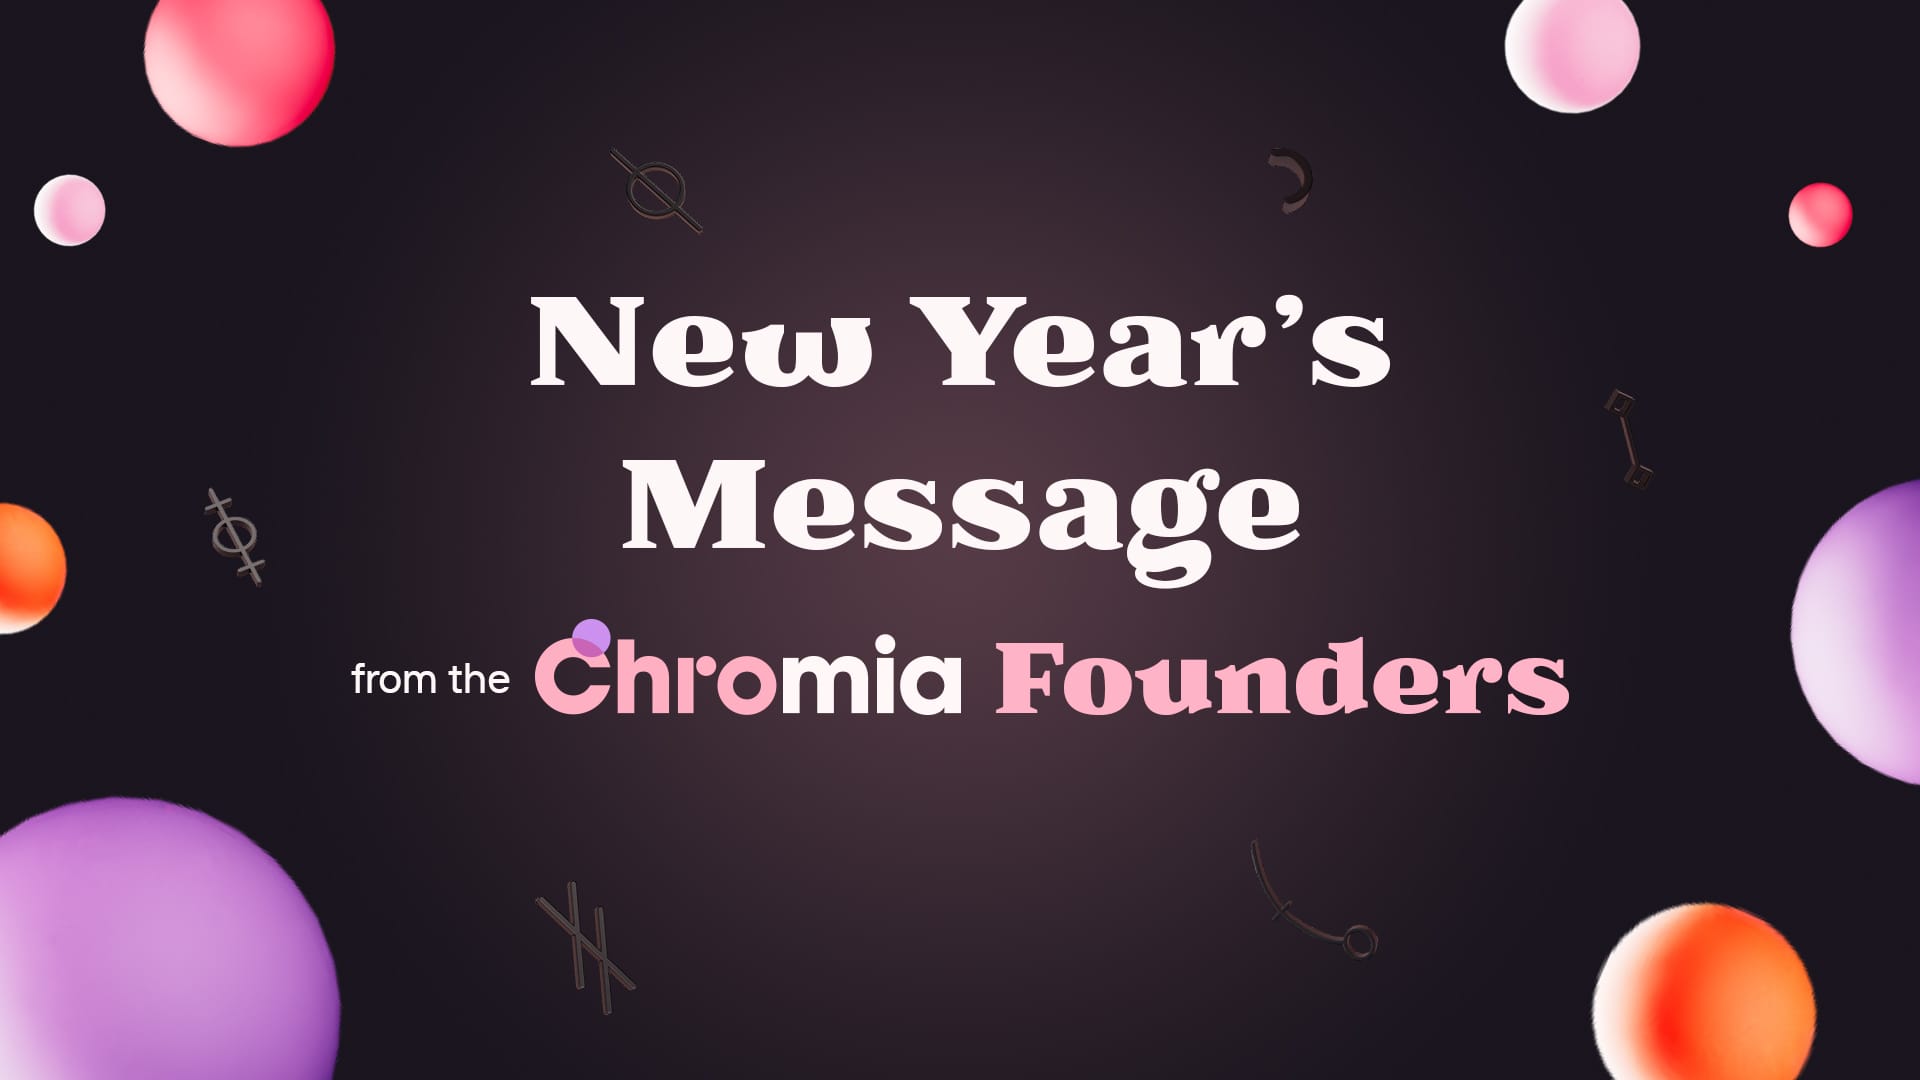 New Year’s Message from the Chromia Founders